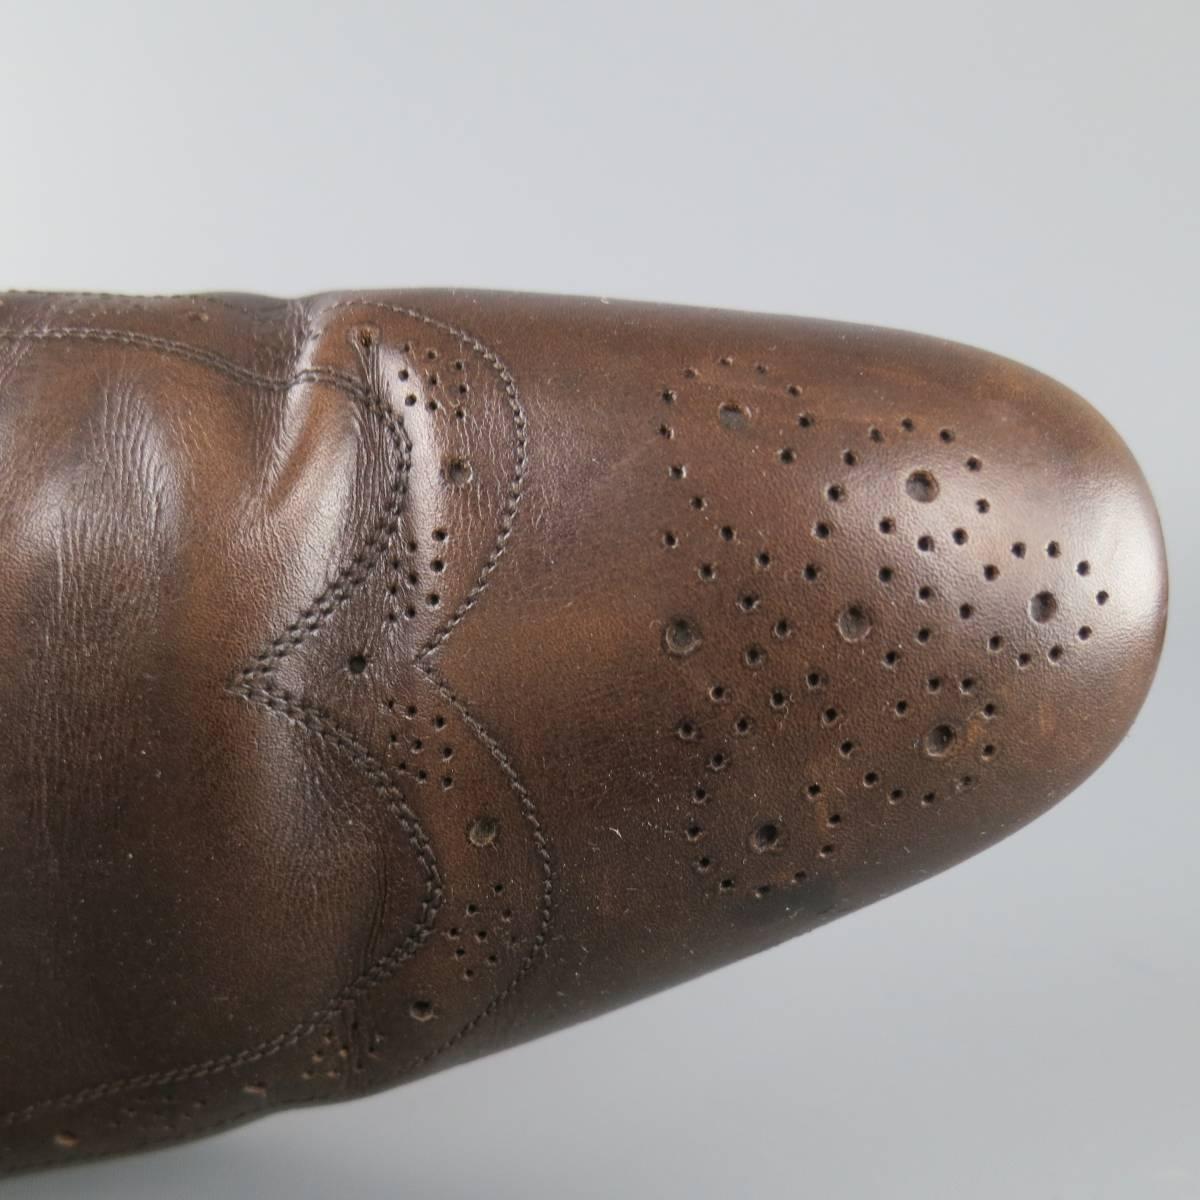 SALVATORE FERRAGAMO brogues come in a deep brown smooth leather and feature a wing tip toe with perforated details throughout. Made in Italy.
 
Good Pre-Owned Condition.
Marked:11 D
 
Outsole: 12.75 x 4 in.